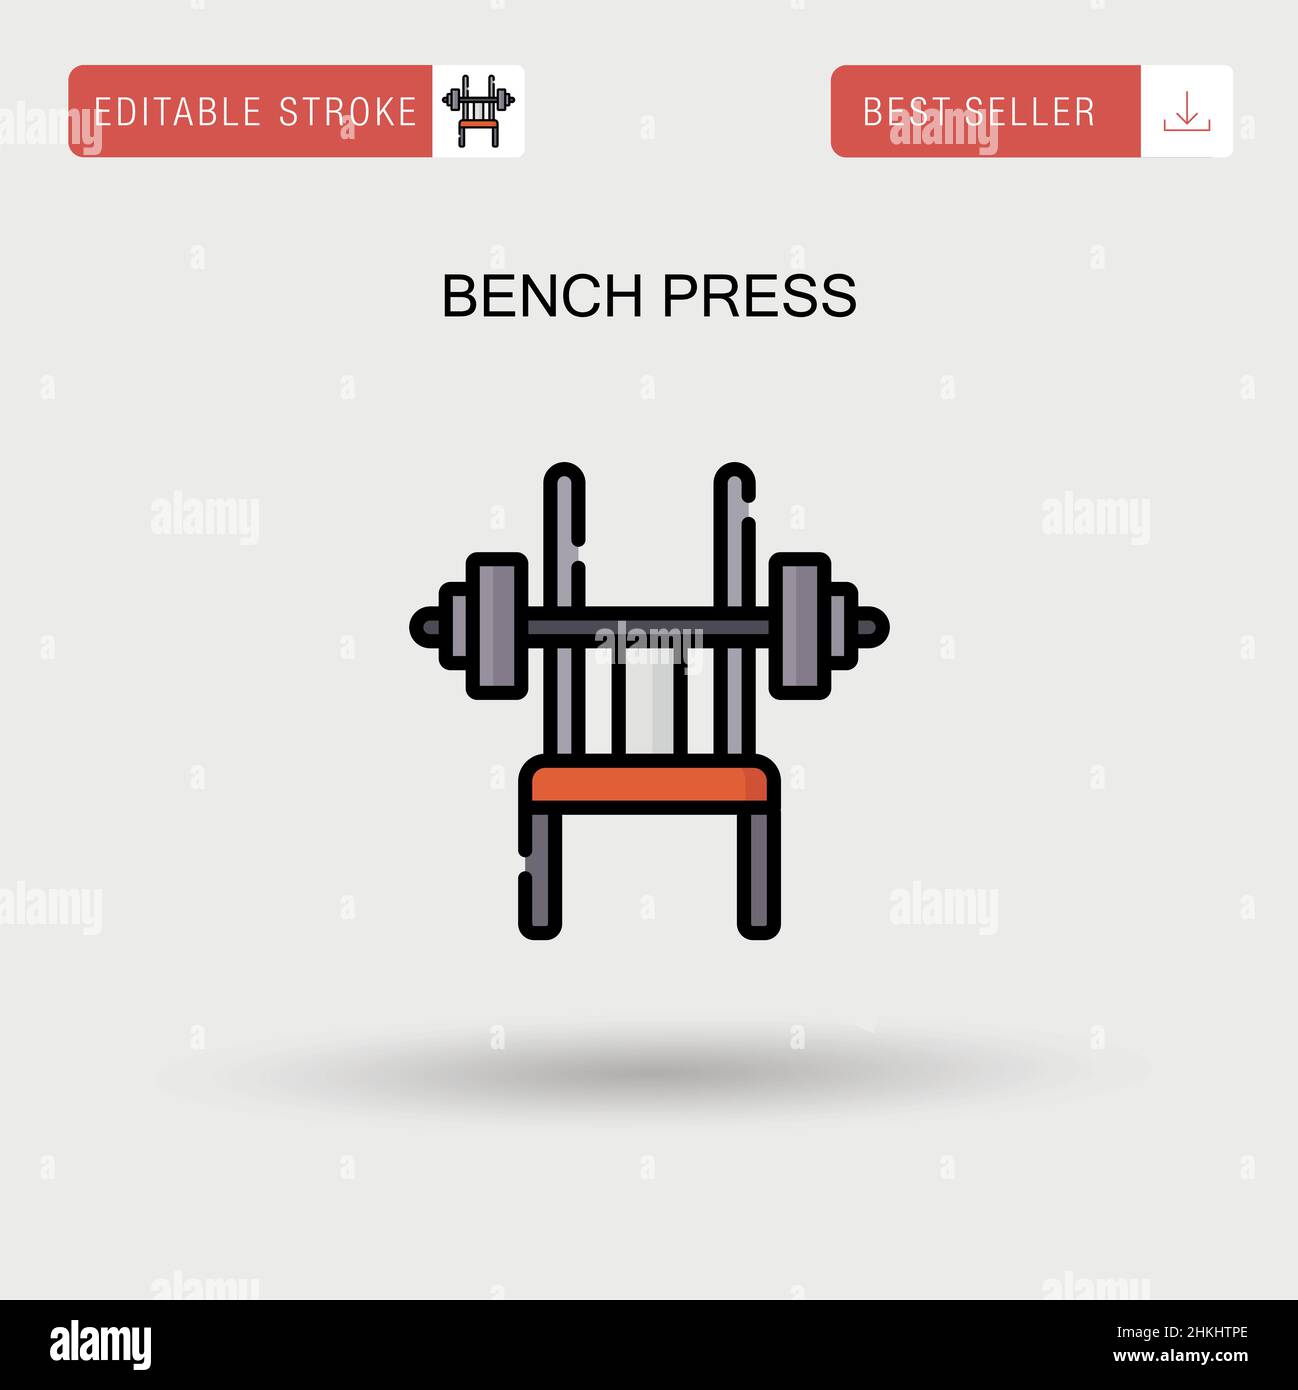 Bench press man gym Stock Vector Images - Alamy